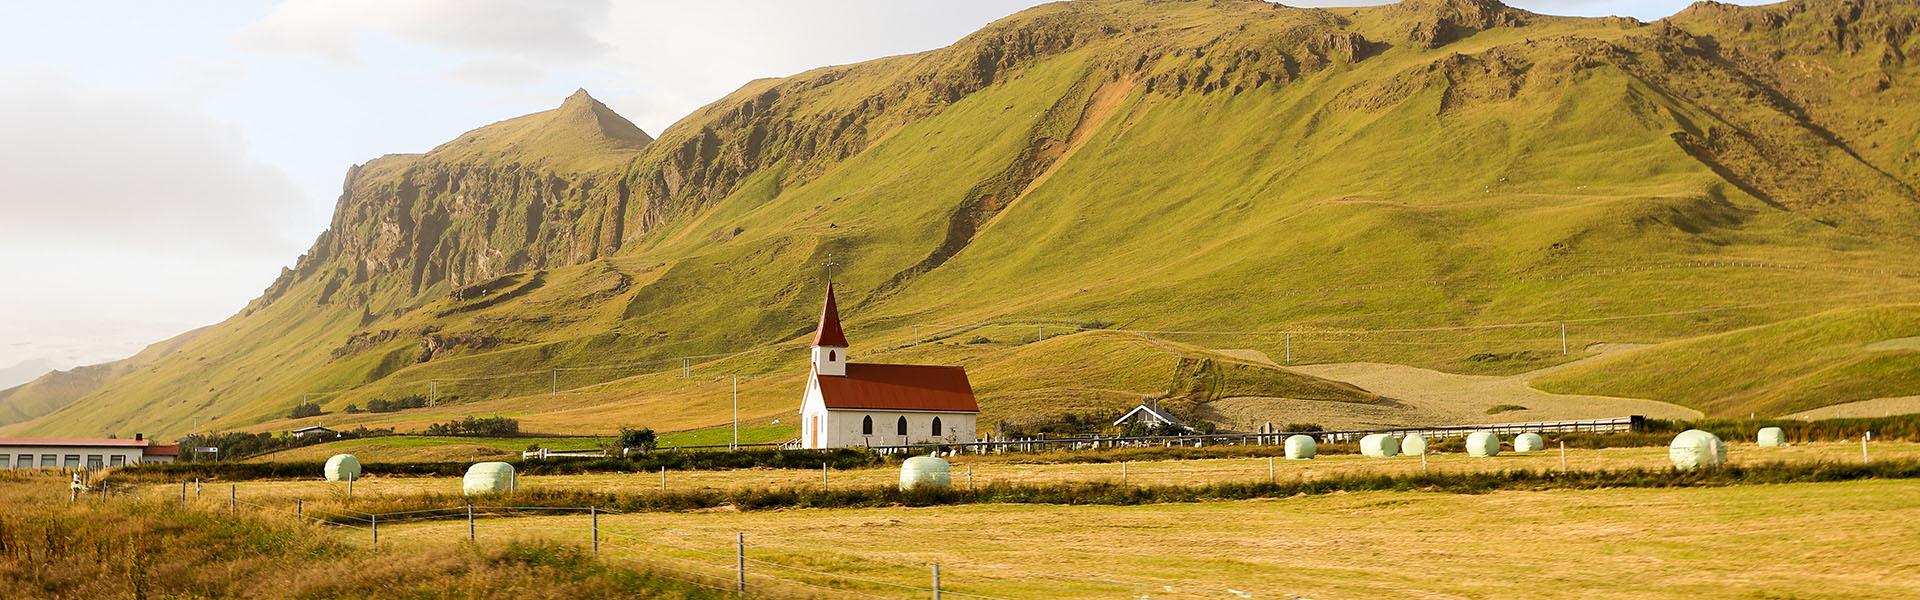 Iceland view of hills with a church